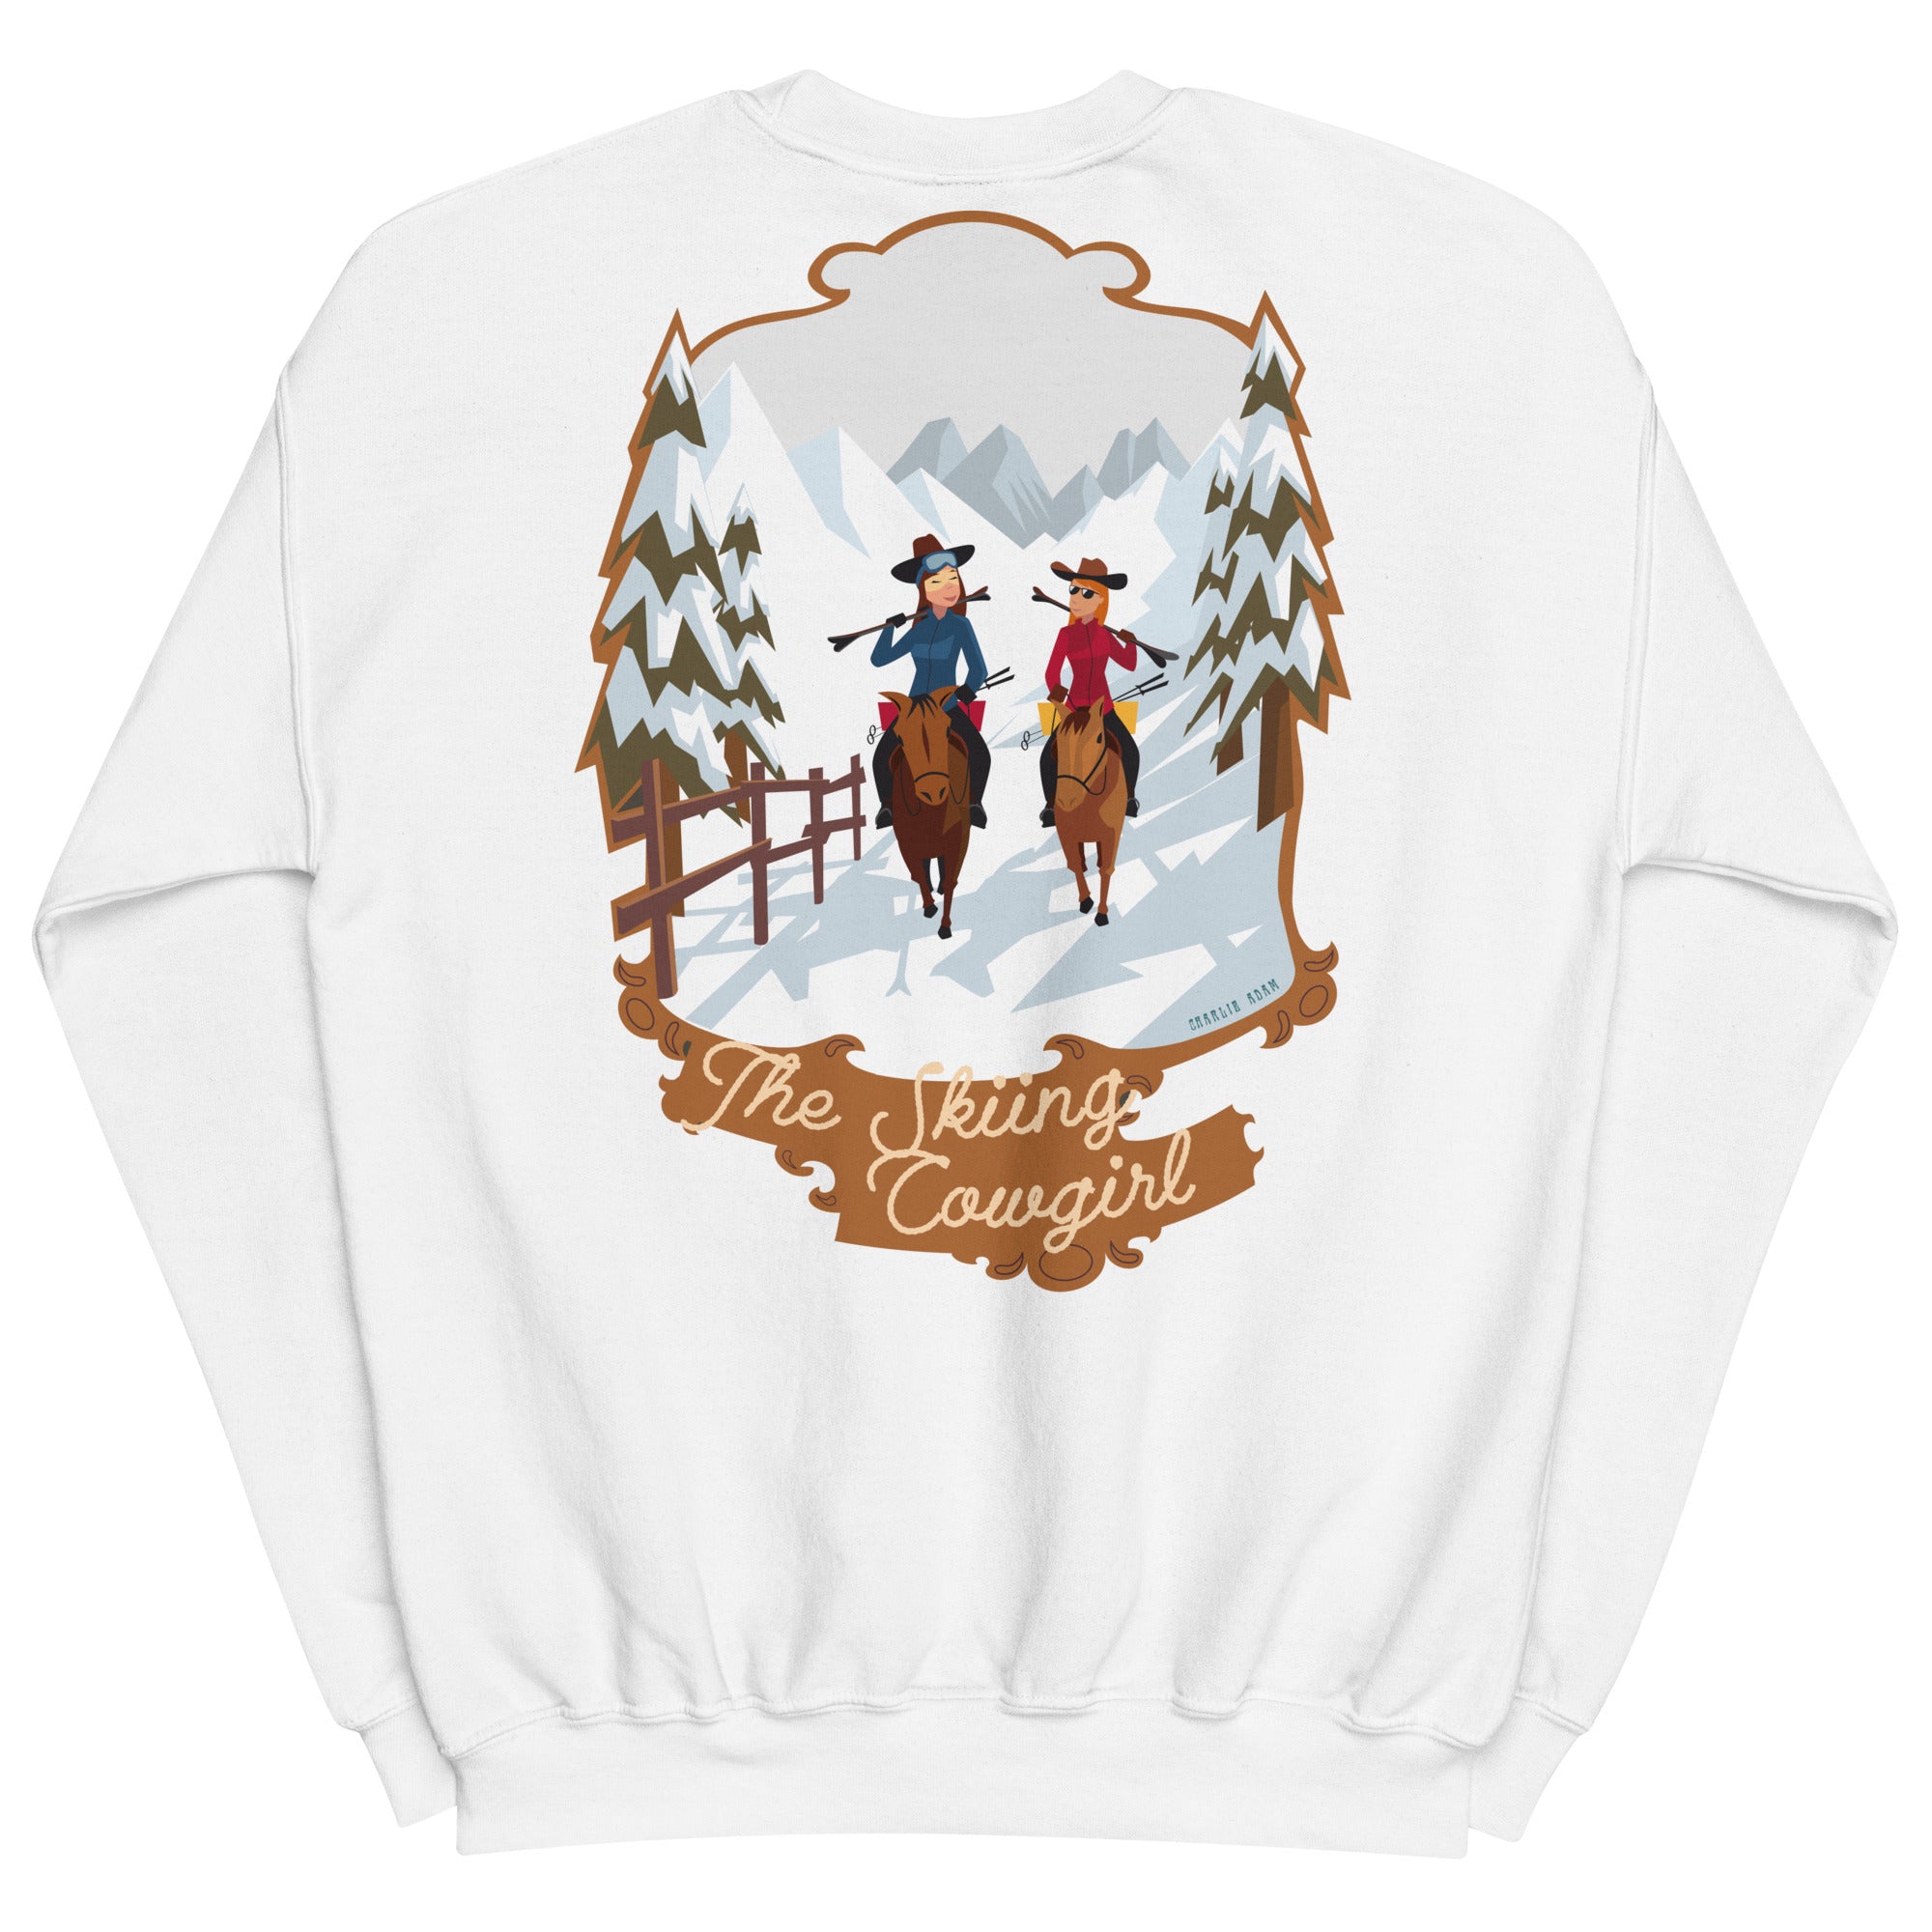 Sweat Unisexe à Col Rond The Skiing Cowgirl (face & dos) sur couleurs claires